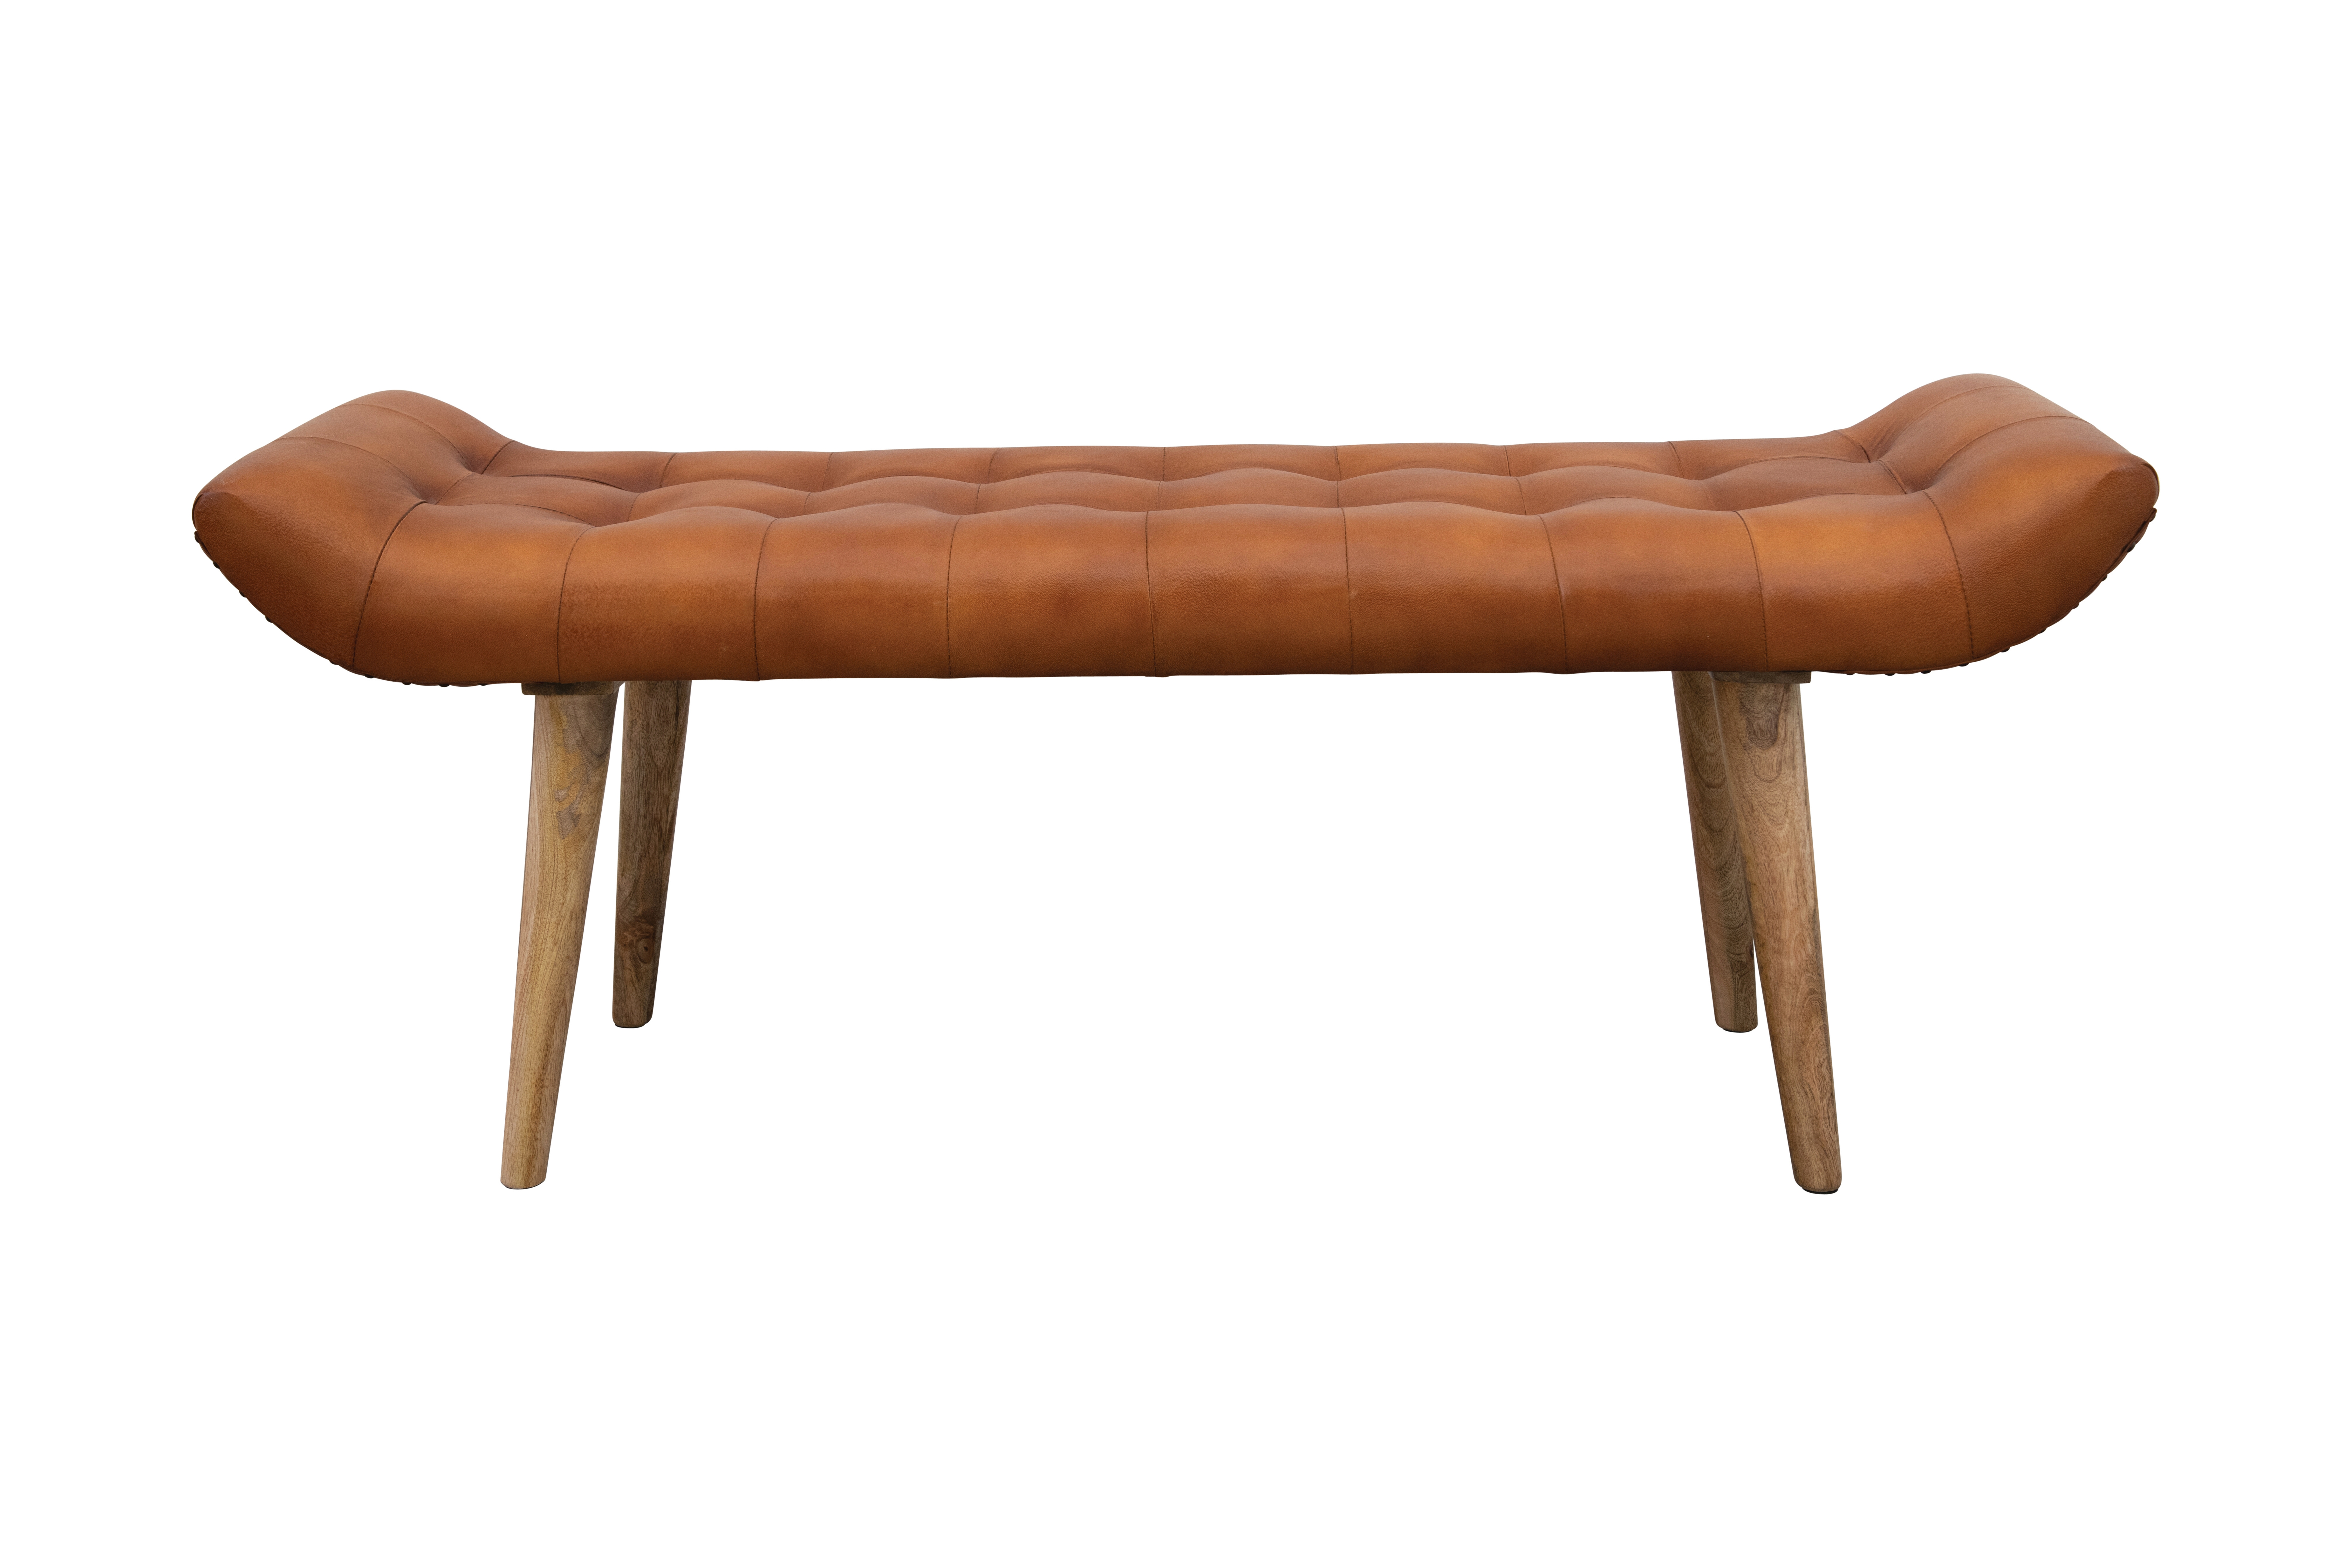 Leather Tufted Bench with Wood Legs - Nomad Home